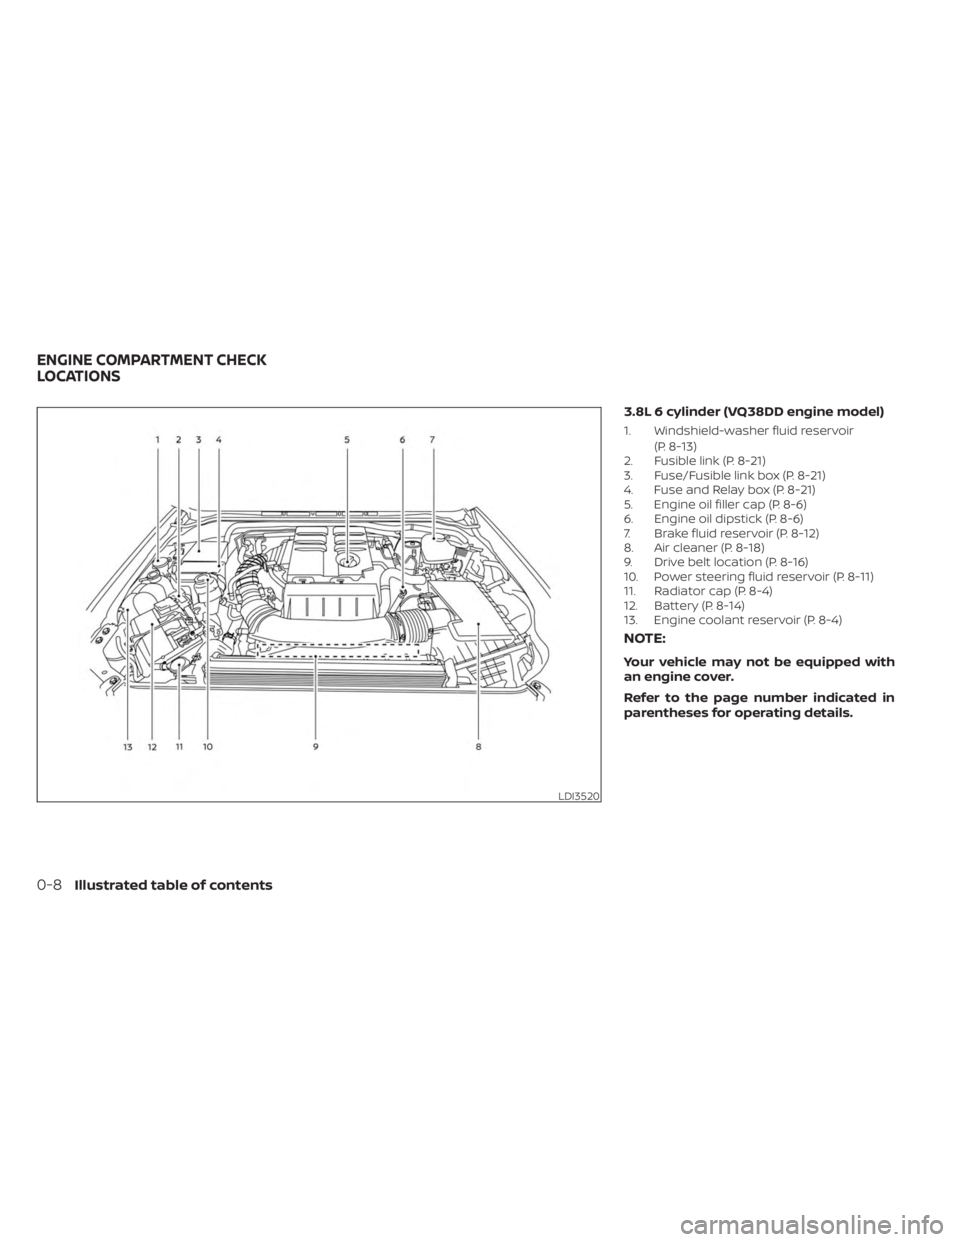 NISSAN FRONTIER 2022  Owner´s Manual 3.8L 6 cylinder (VQ38DD engine model)
1. Windshield-washer fluid reservoir(P. 8-13)
2. Fusible link (P. 8-21)
3. Fuse/Fusible link box (P. 8-21)
4. Fuse and Relay box (P. 8-21)
5. Engine oil filler ca